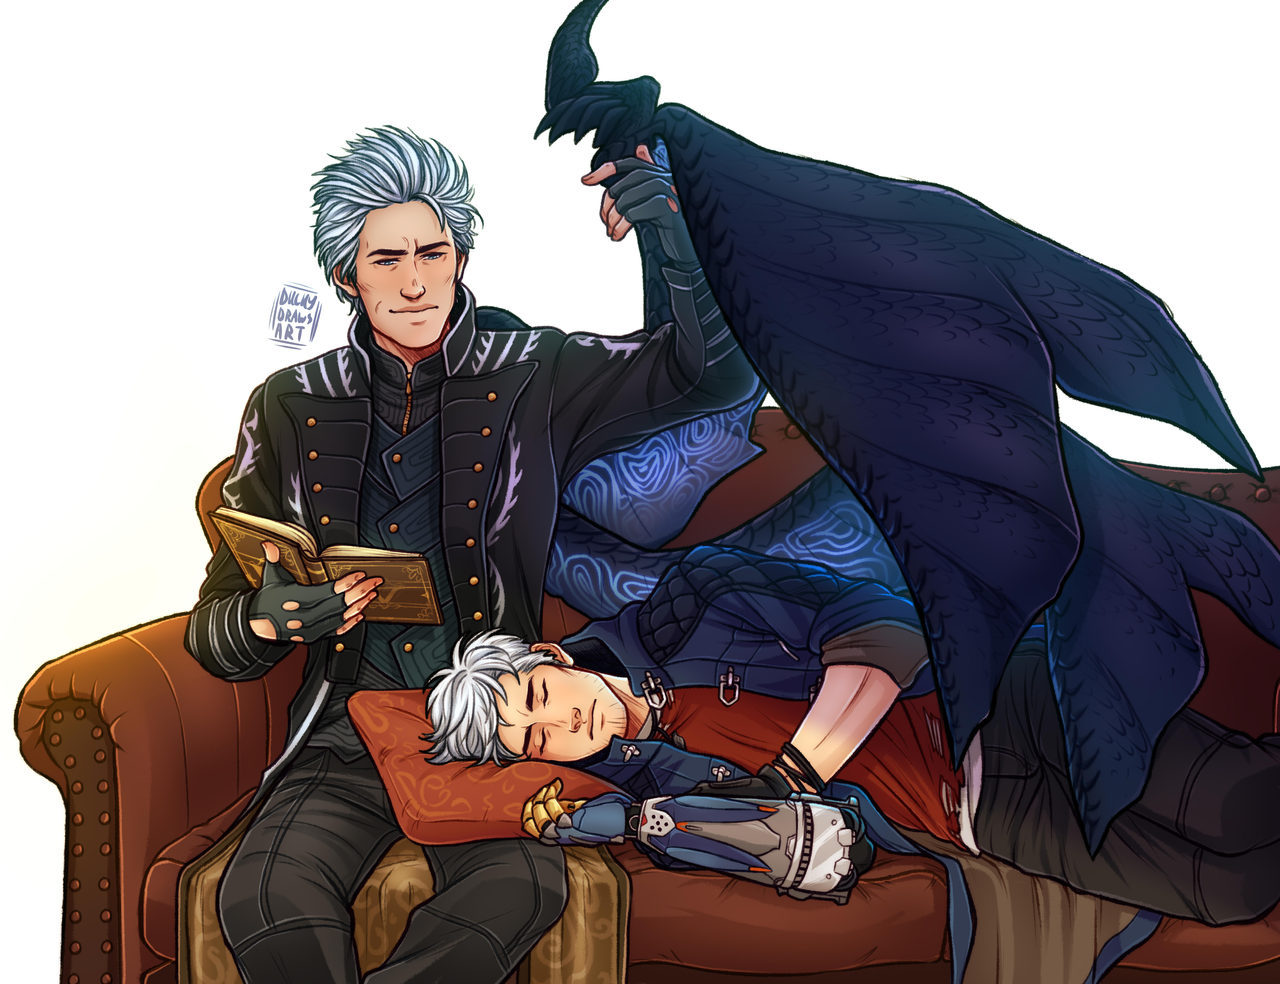 Drusoona (Vergil lover💙) on X: RT @SafK_Art: don't you all think Nero  deserves a plastic chair as well? #DevilMayCry #Nero #artwork #Vergil   / X